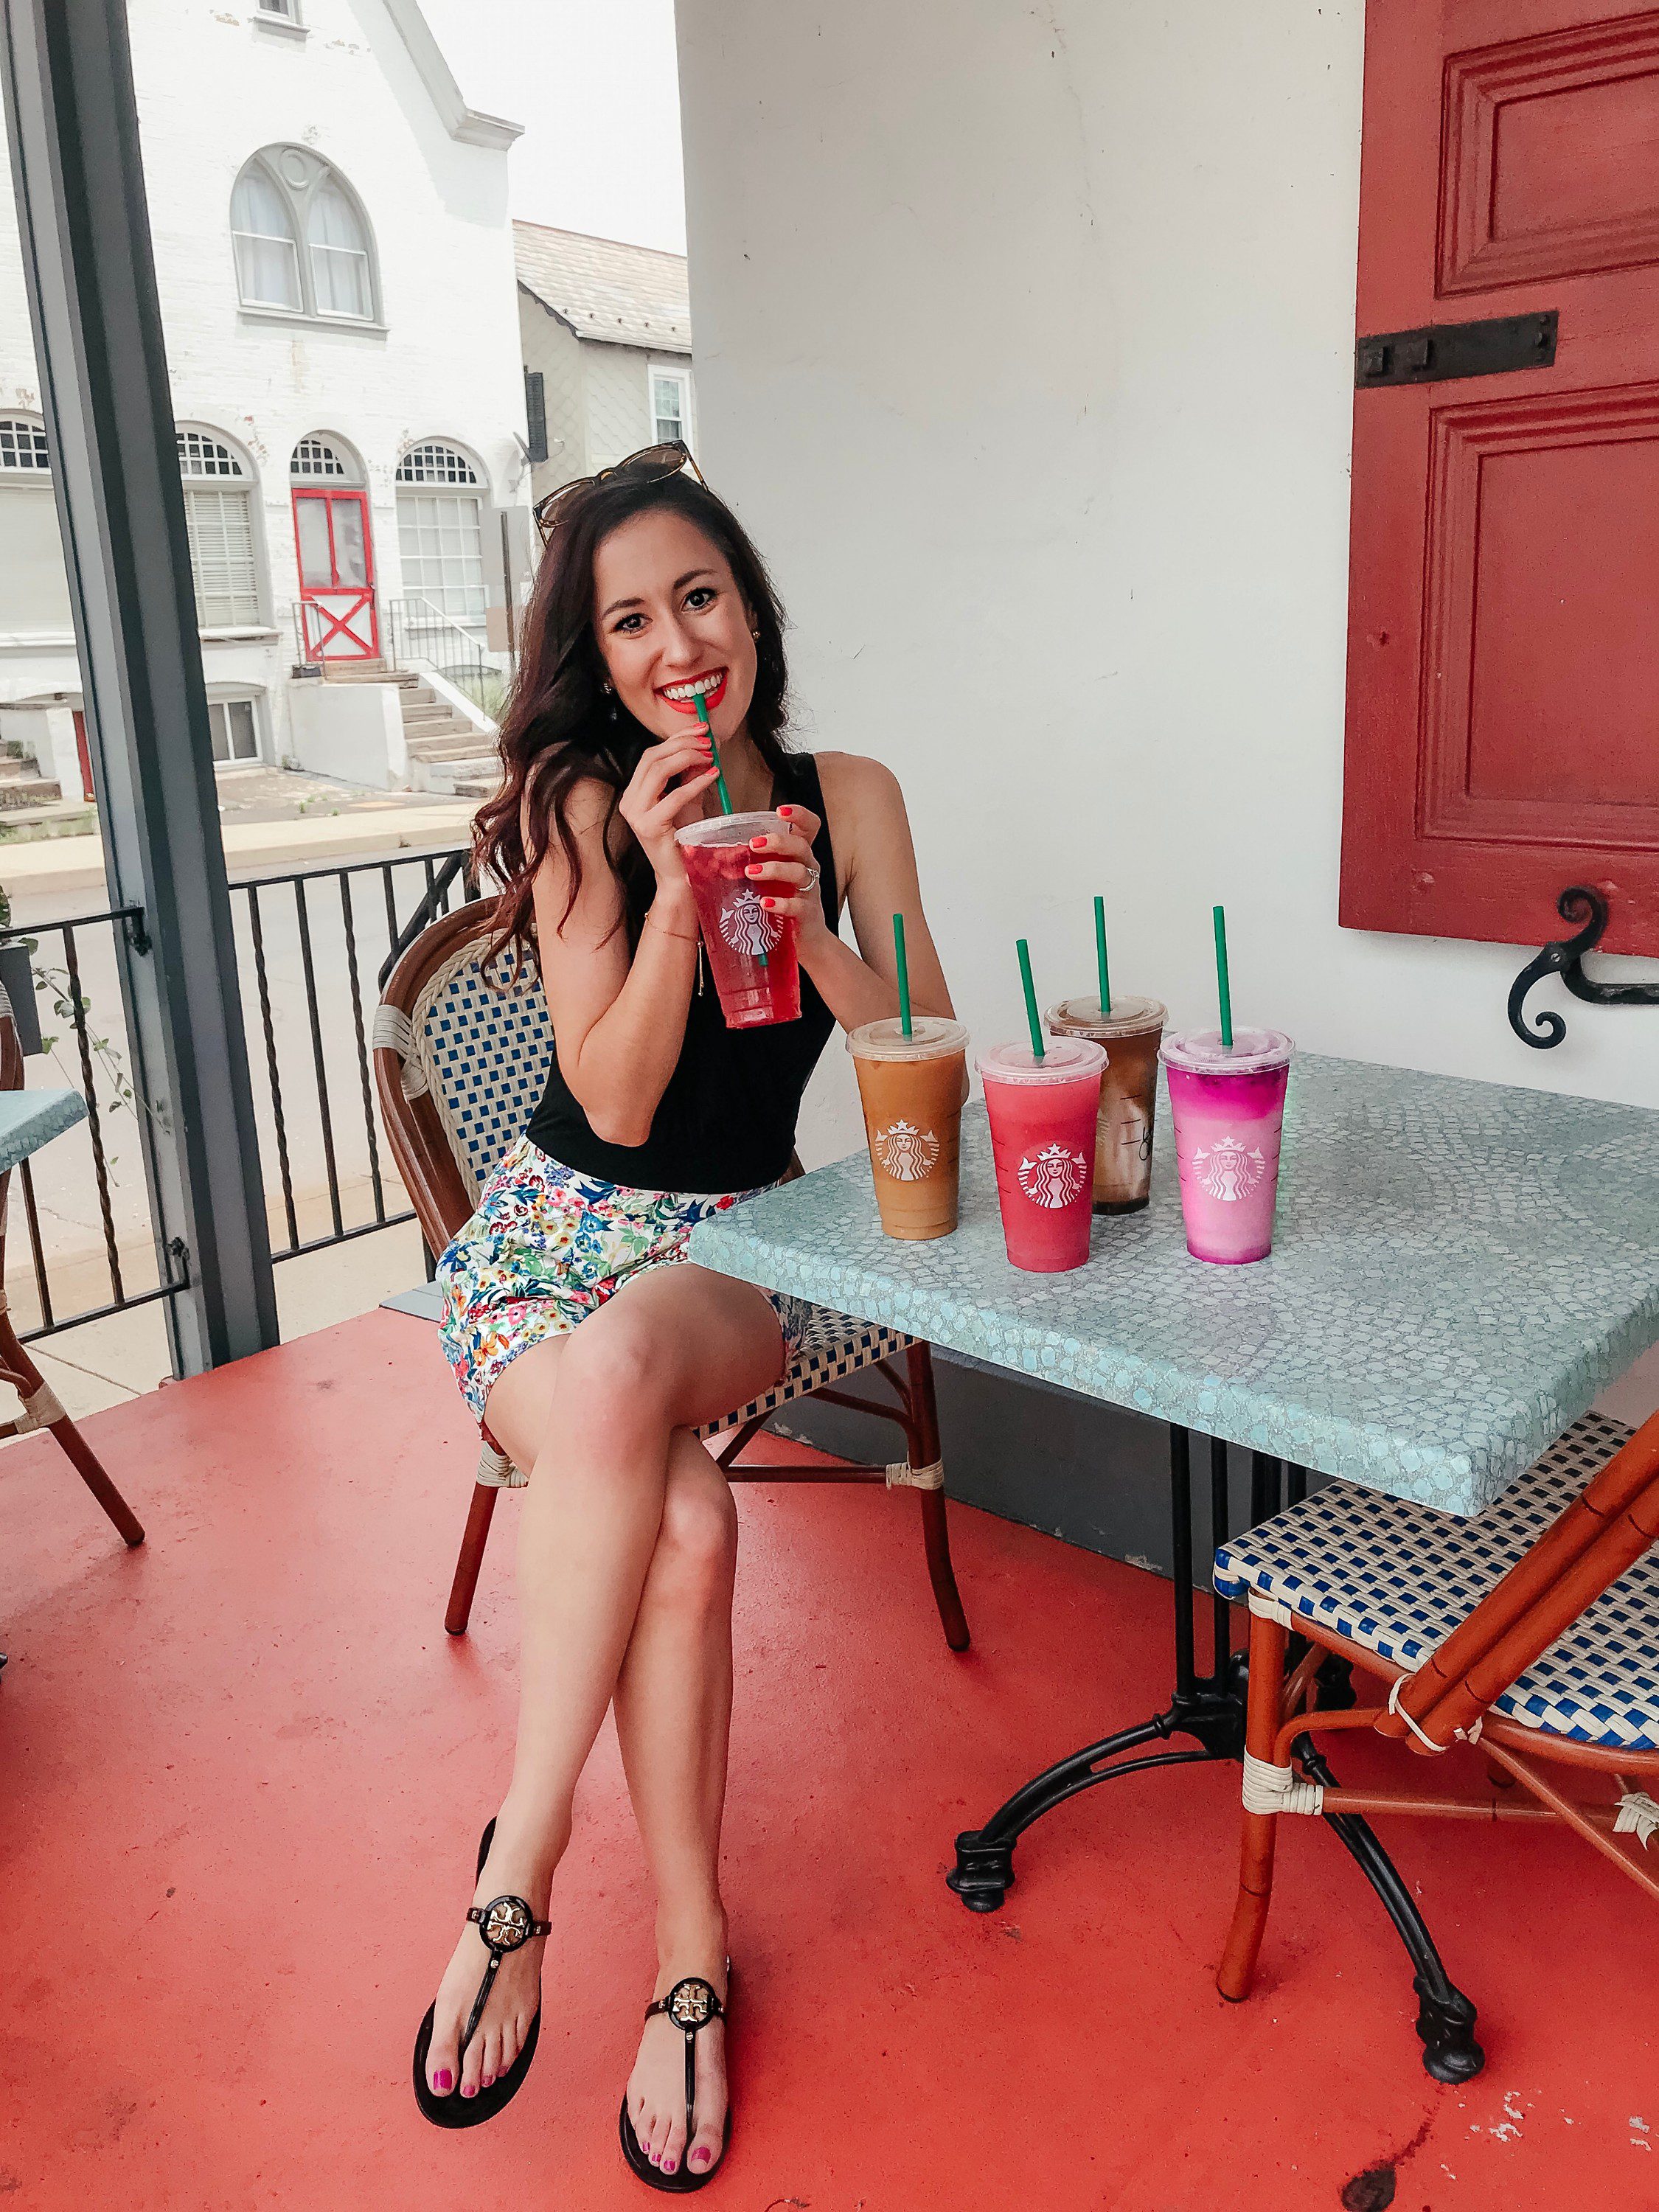 5 Refreshing Starbucks Drinks - Yummy drinks for summer, and how to specifically ask for them at Starbucks! on Coming Up Roses